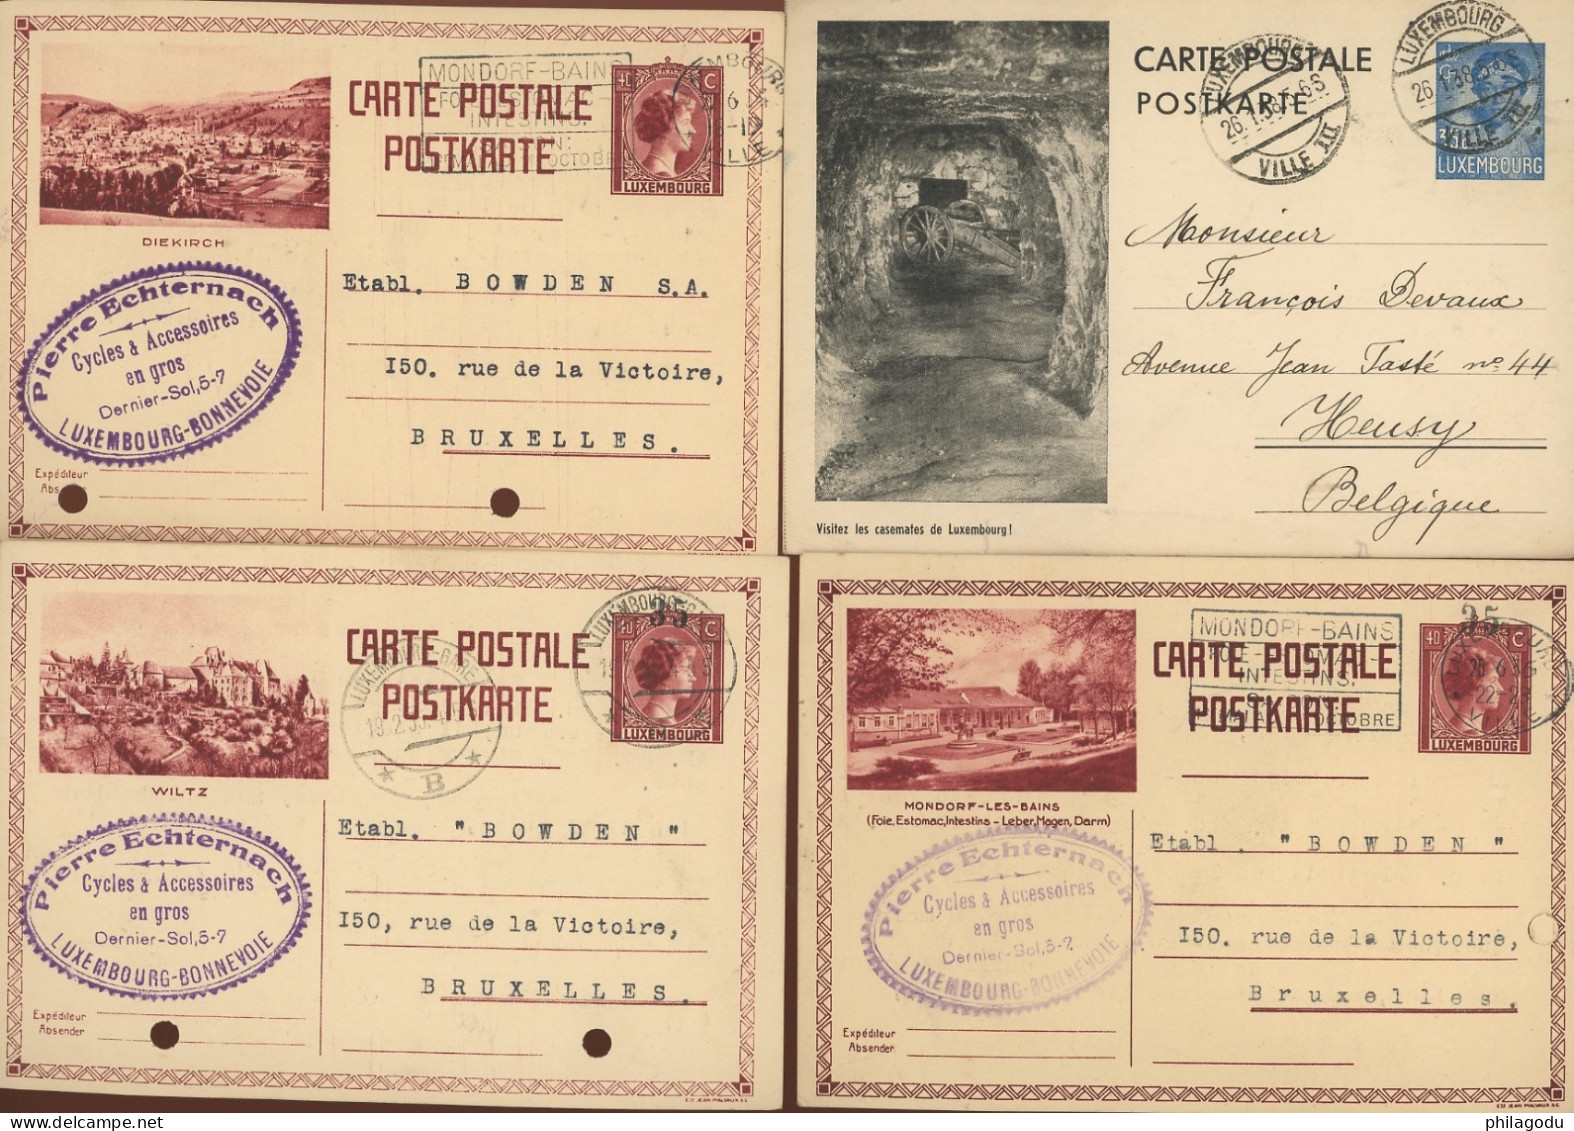 6 Entiers Tourisme Avec Trous - Stamped Stationery